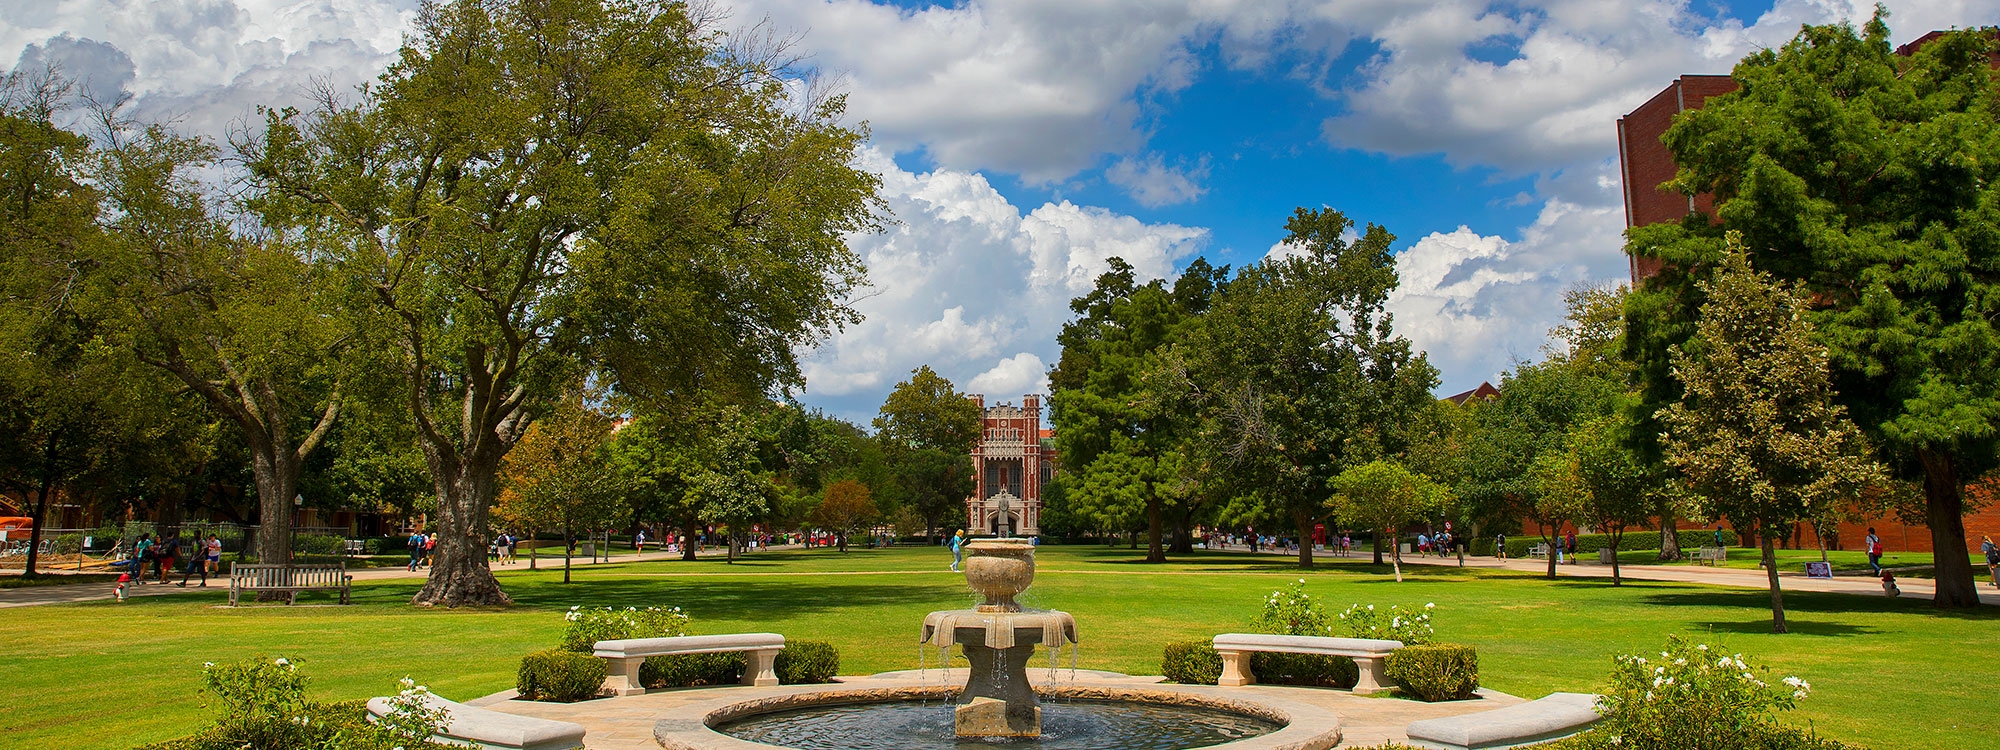 Trees and buildings on OU's campus, with a blue sky and white clouds in the background and a fountain and benches in the foreground.